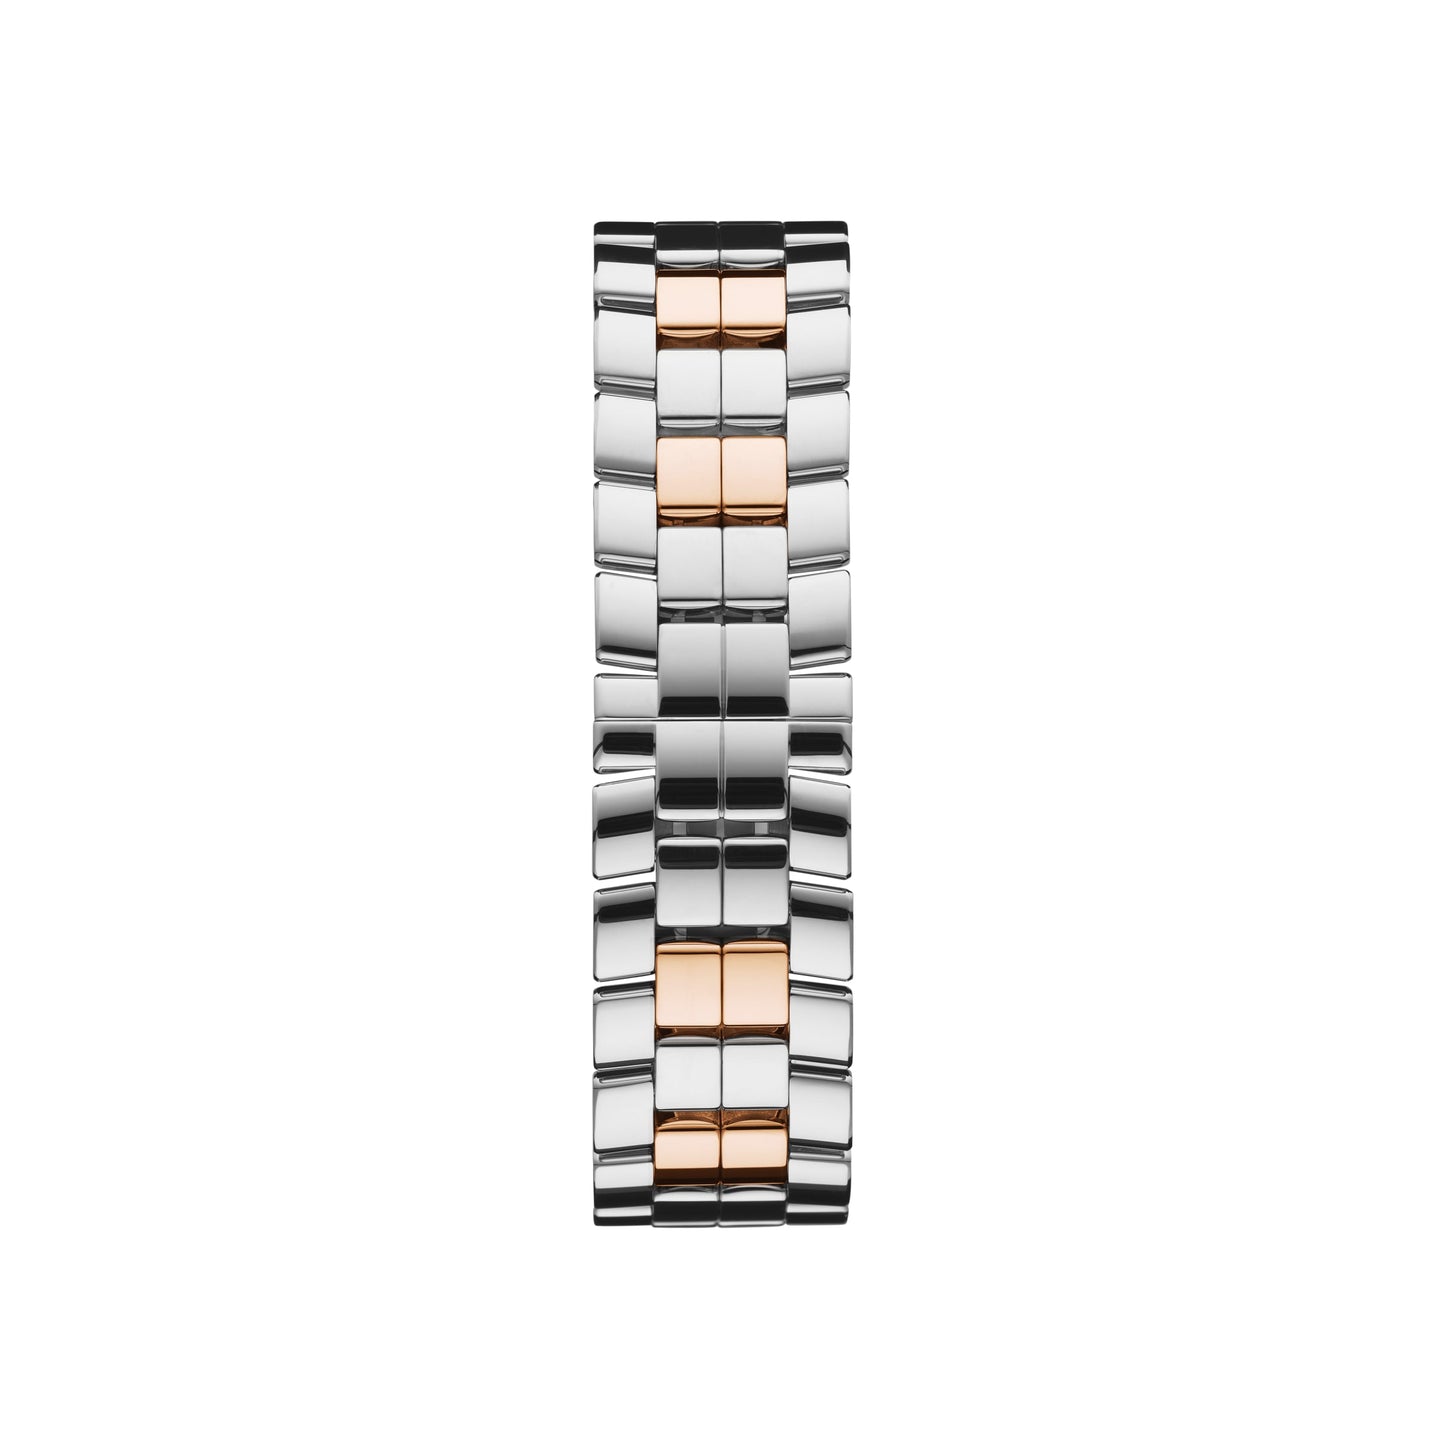 HAPPY SPORT 36 MM, AUTOMATIC, ETHICAL ROSE GOLD, LUCENT STEEL™, DIAMONDS 278559-6025